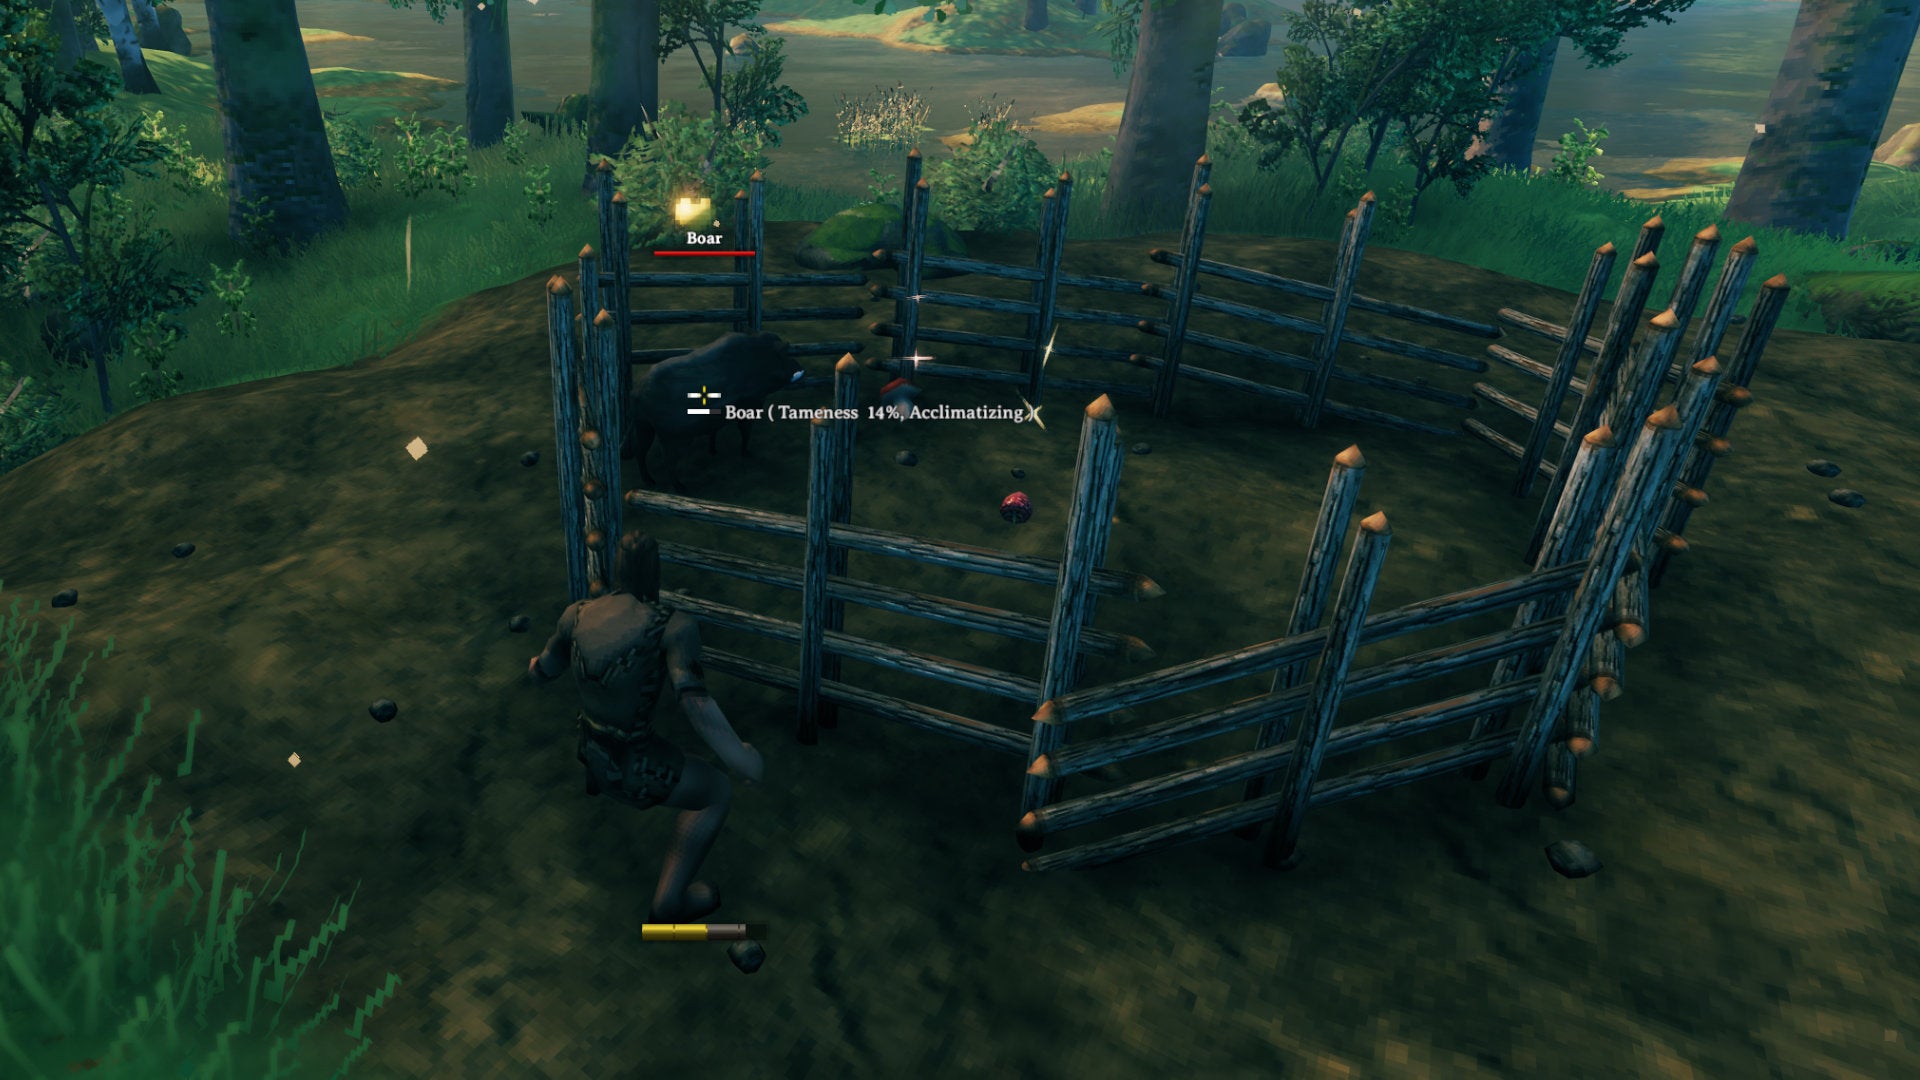 A Valheim screenshot of a player standing outside a Boar pen, inspecting a Boar in the process of being tamed.